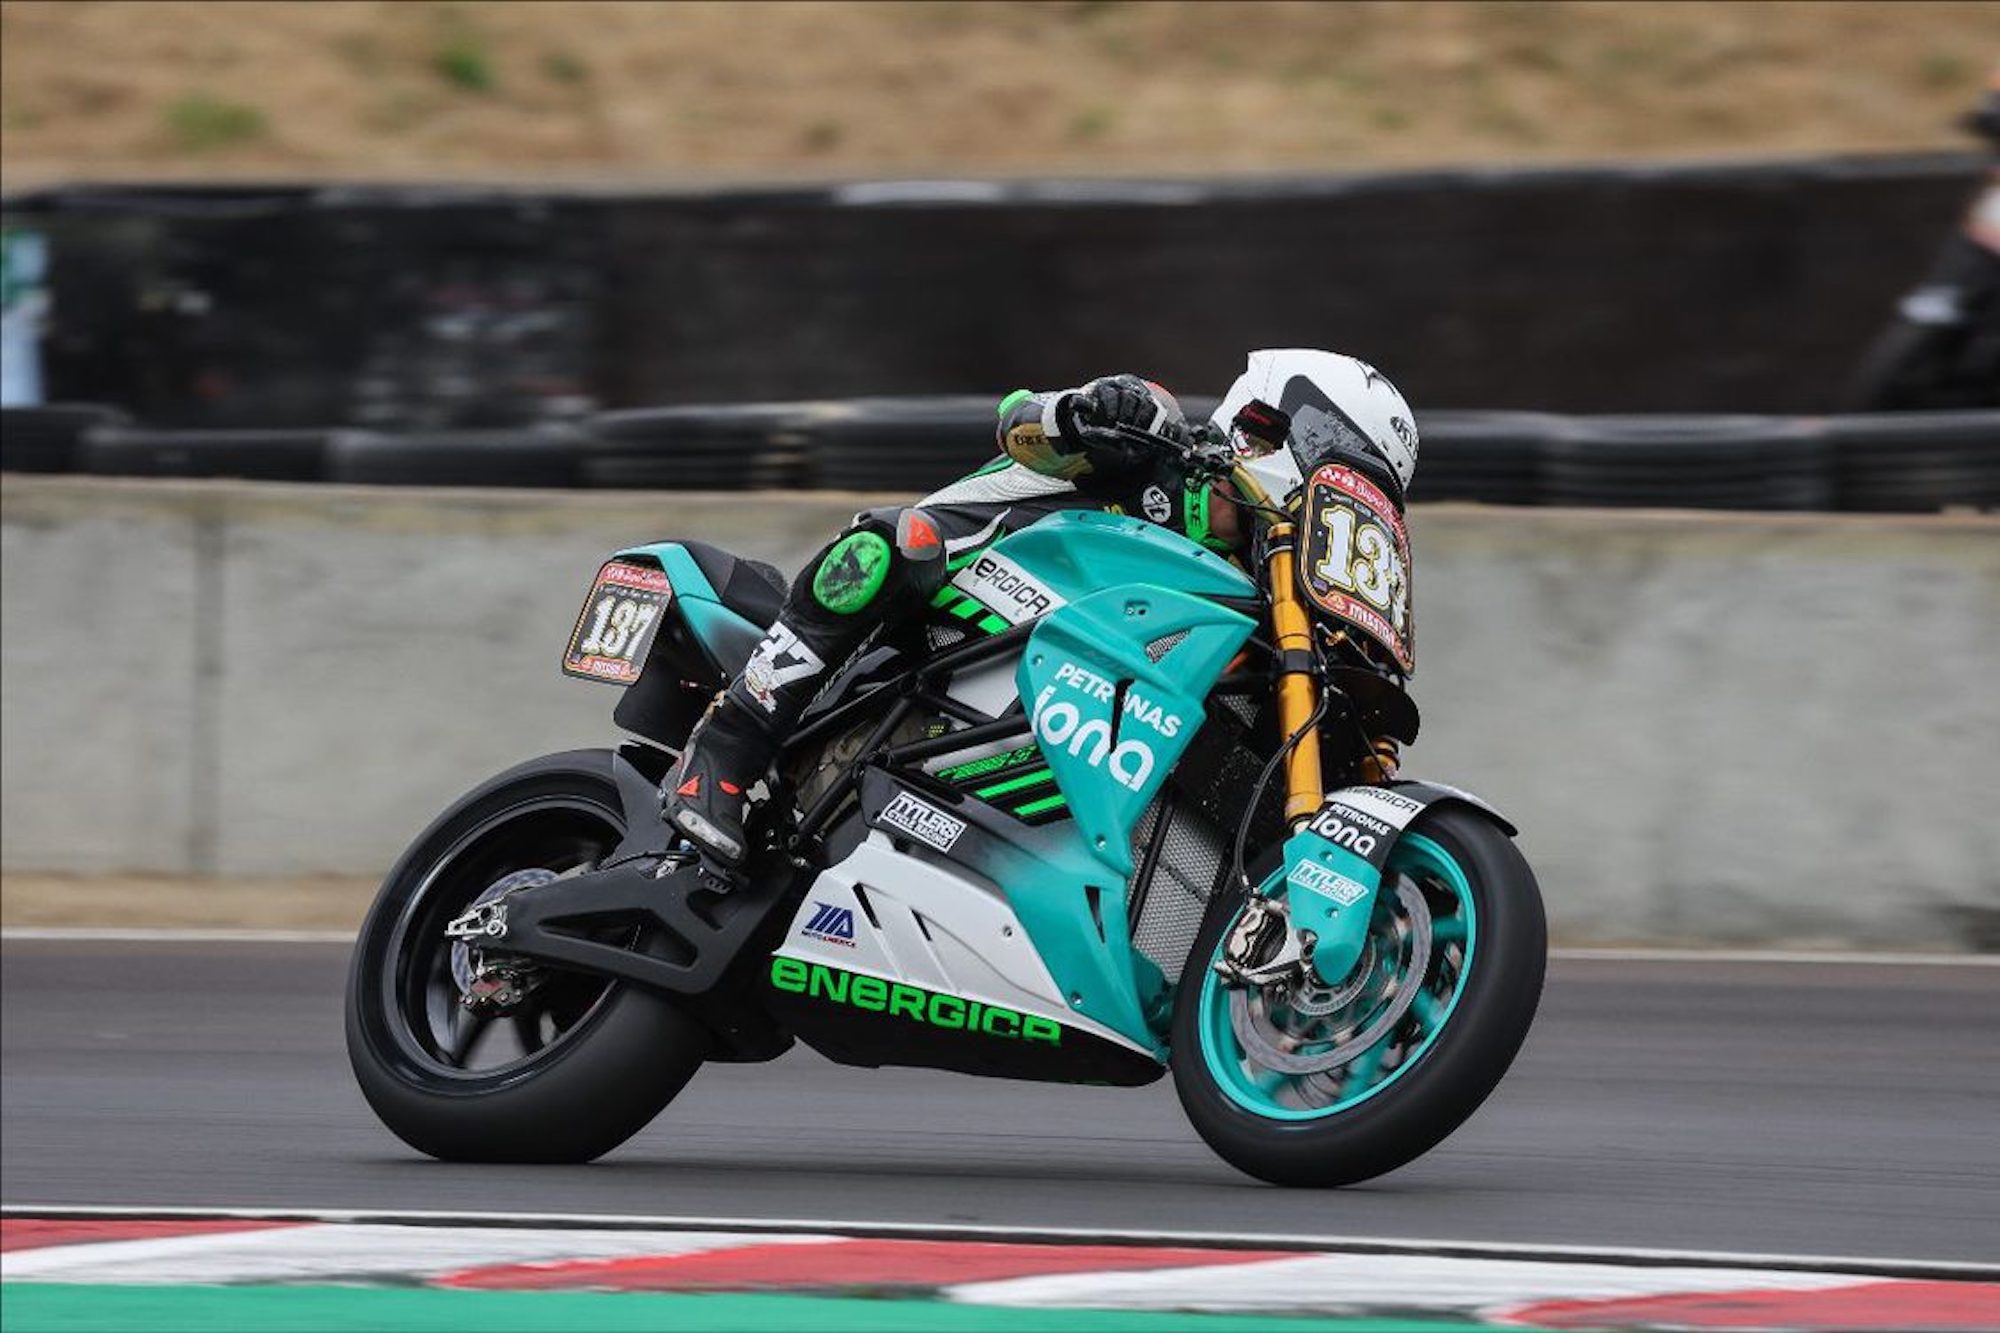 A view of Energica's Eva Ribelle RS taking the lead at this past Round One of Super Hooligans (Laguna Seca). Media sourced from Energica's recent press release.